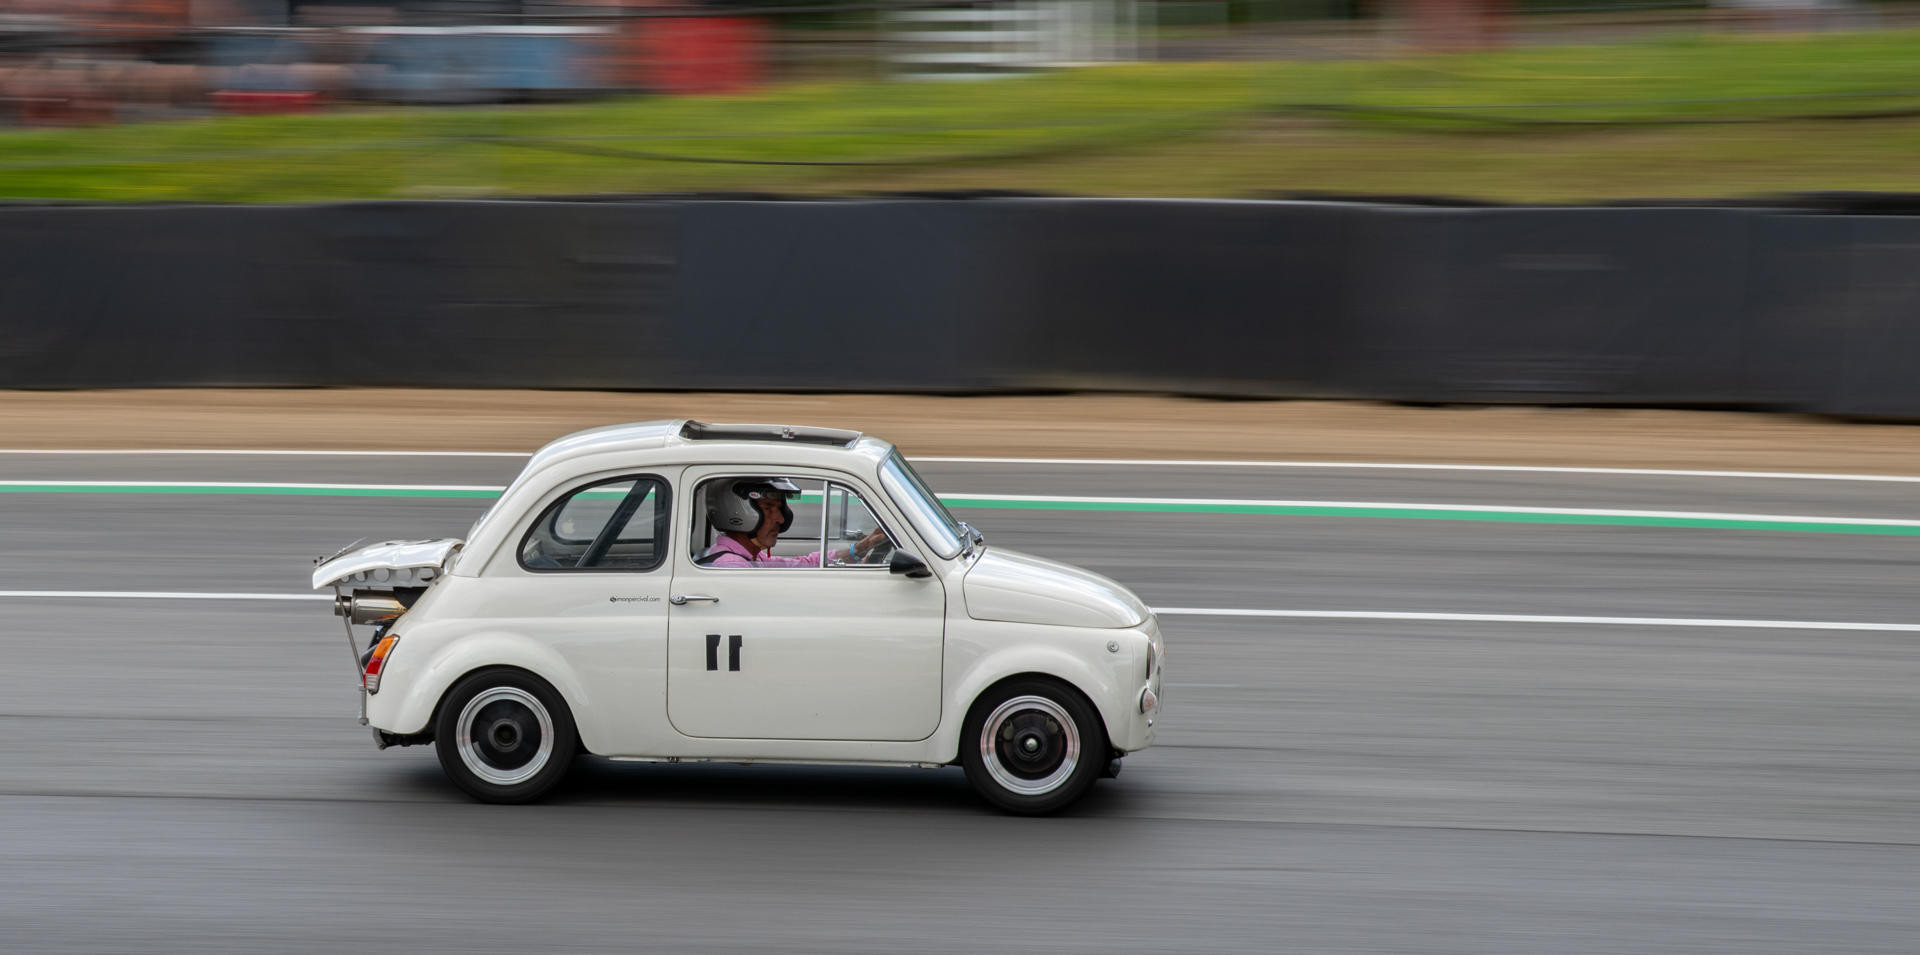 Abarth Heritage Group Cars - Brands Hatch - Credit Chris Bass